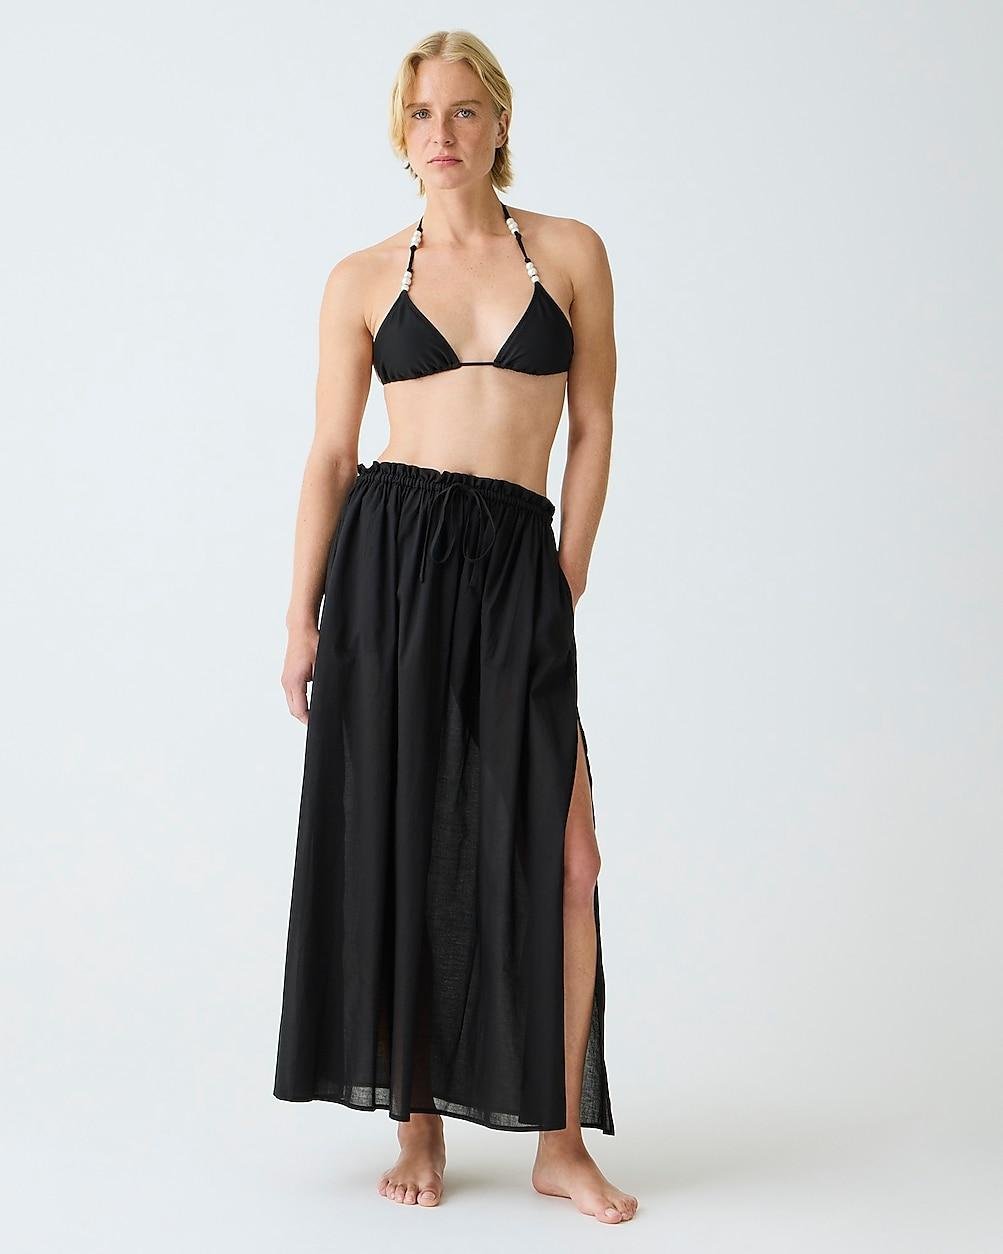 Cotton voile maxi skirt by J.CREW